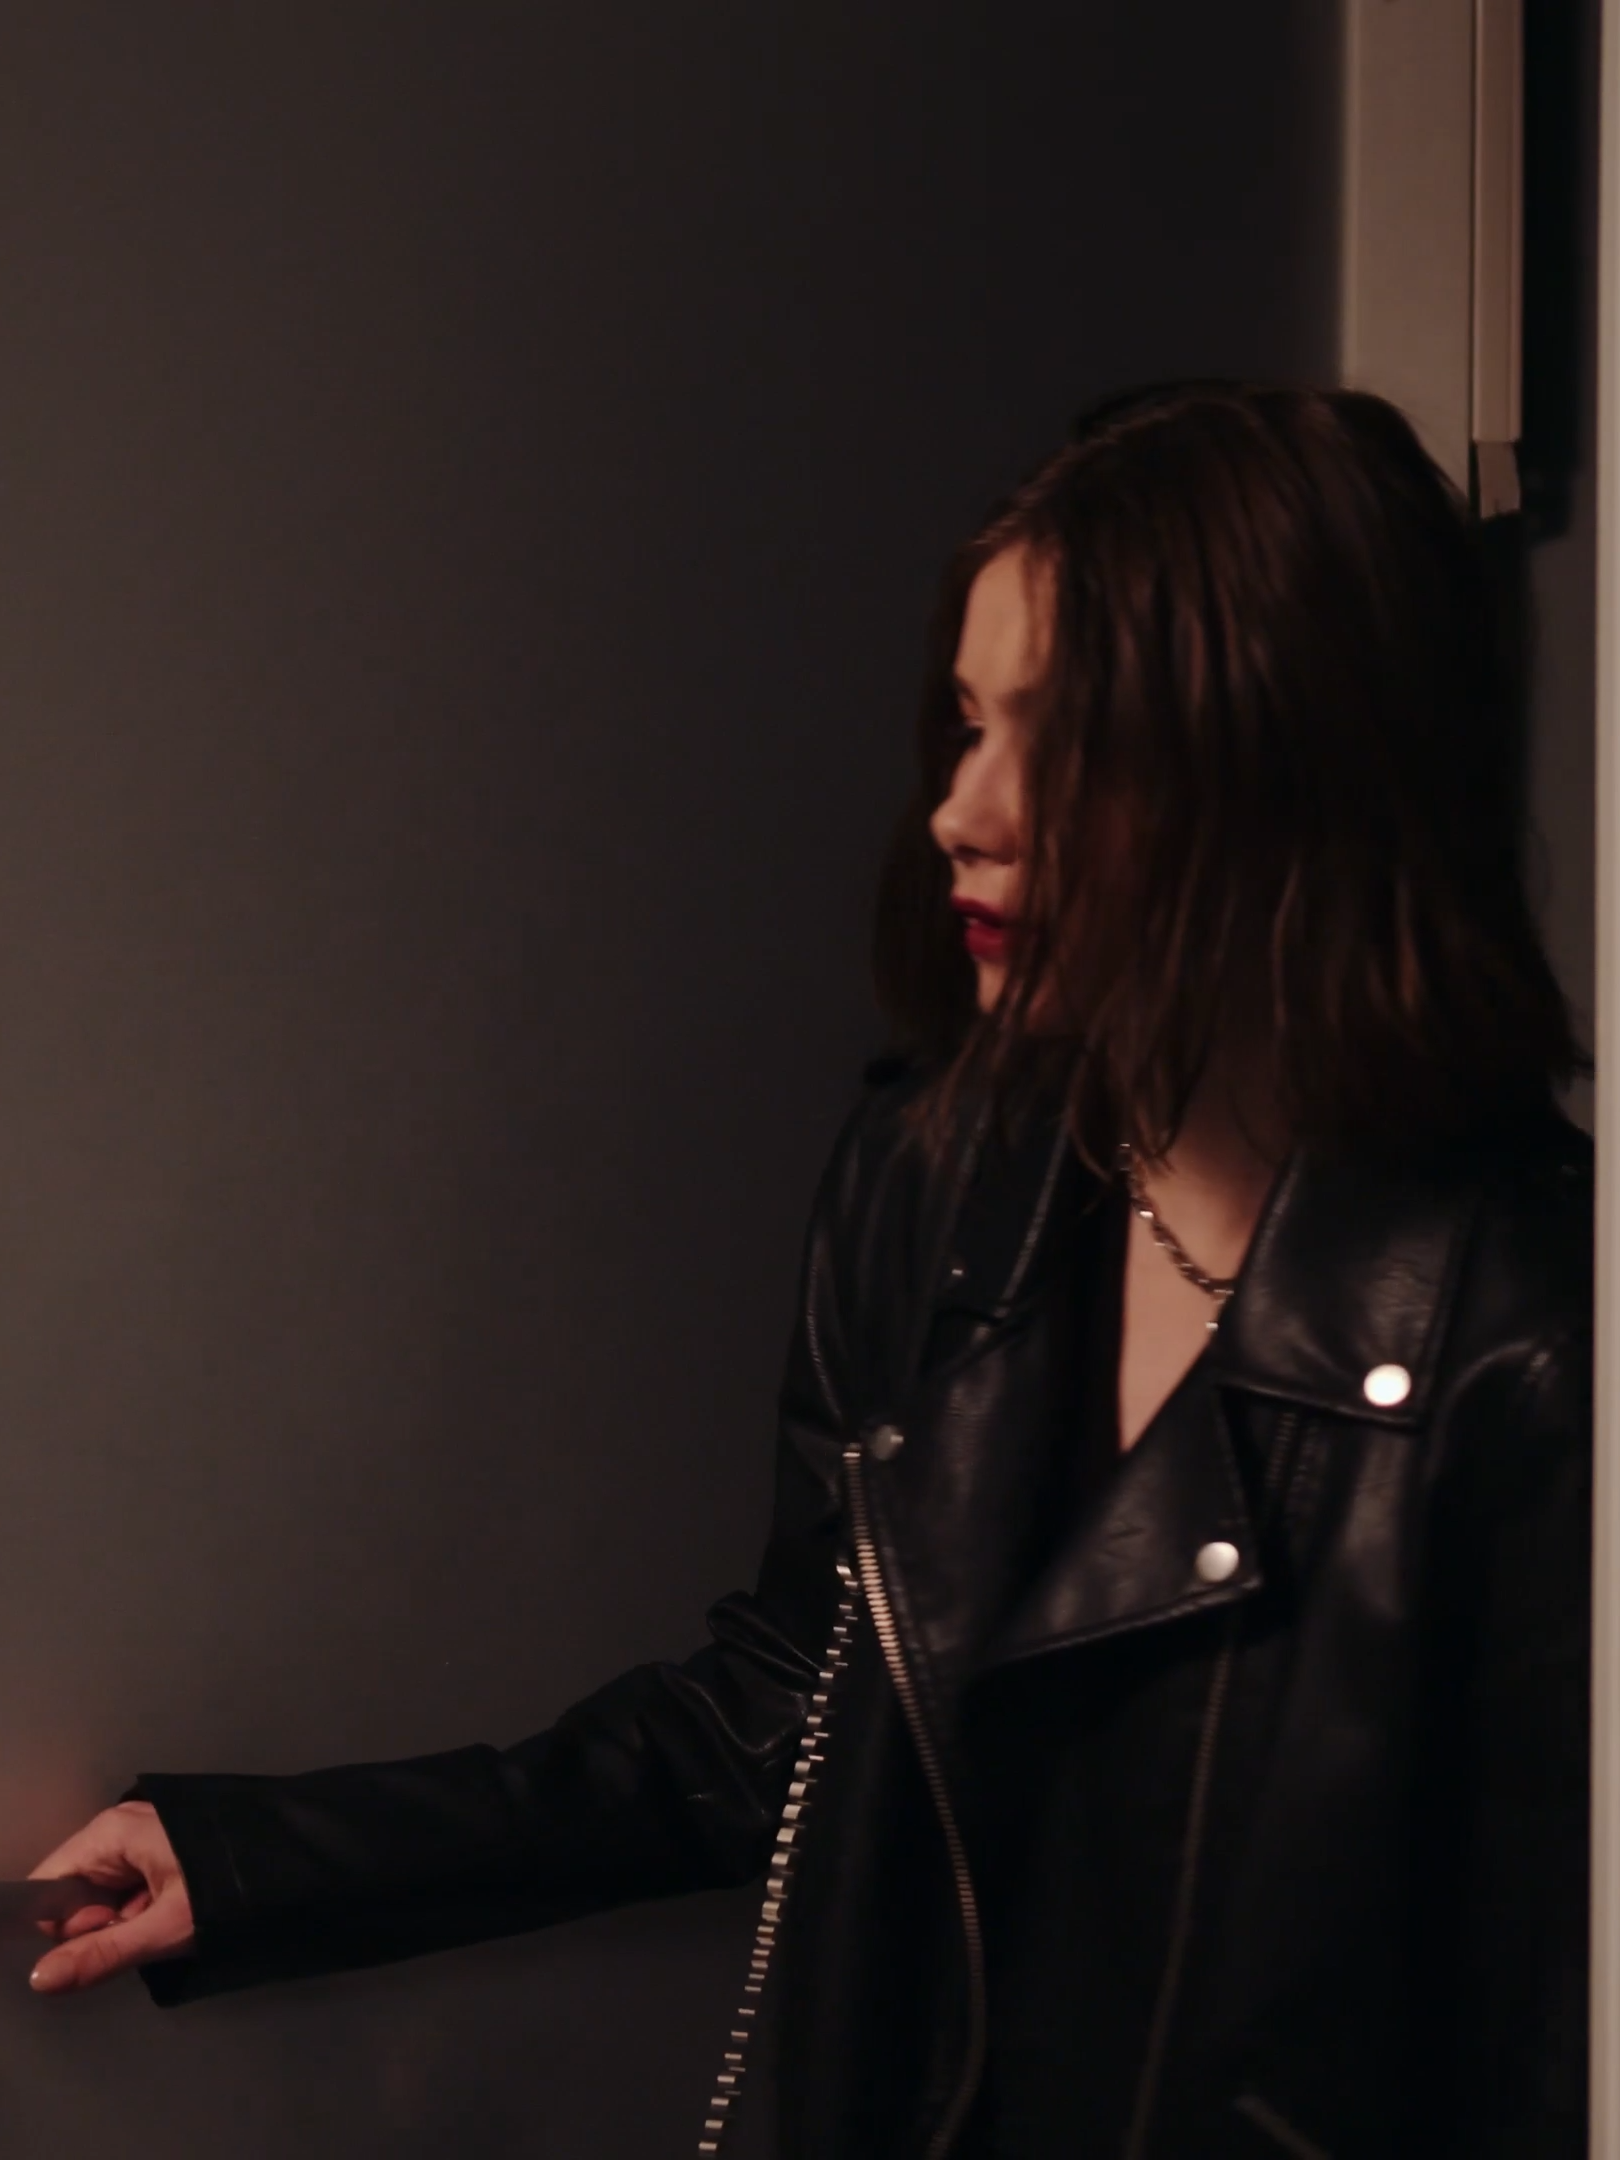 xNotStock 16 / Tired Young woman, wearing black leather jacket, back home after a party / #stock  #video  #woman  #girl  #leather  #jacket  #fashion  #fashiontiktok  #Home #walk #chic  #inside #foryou  #fyp  #foryoupage  #walking #tired #party